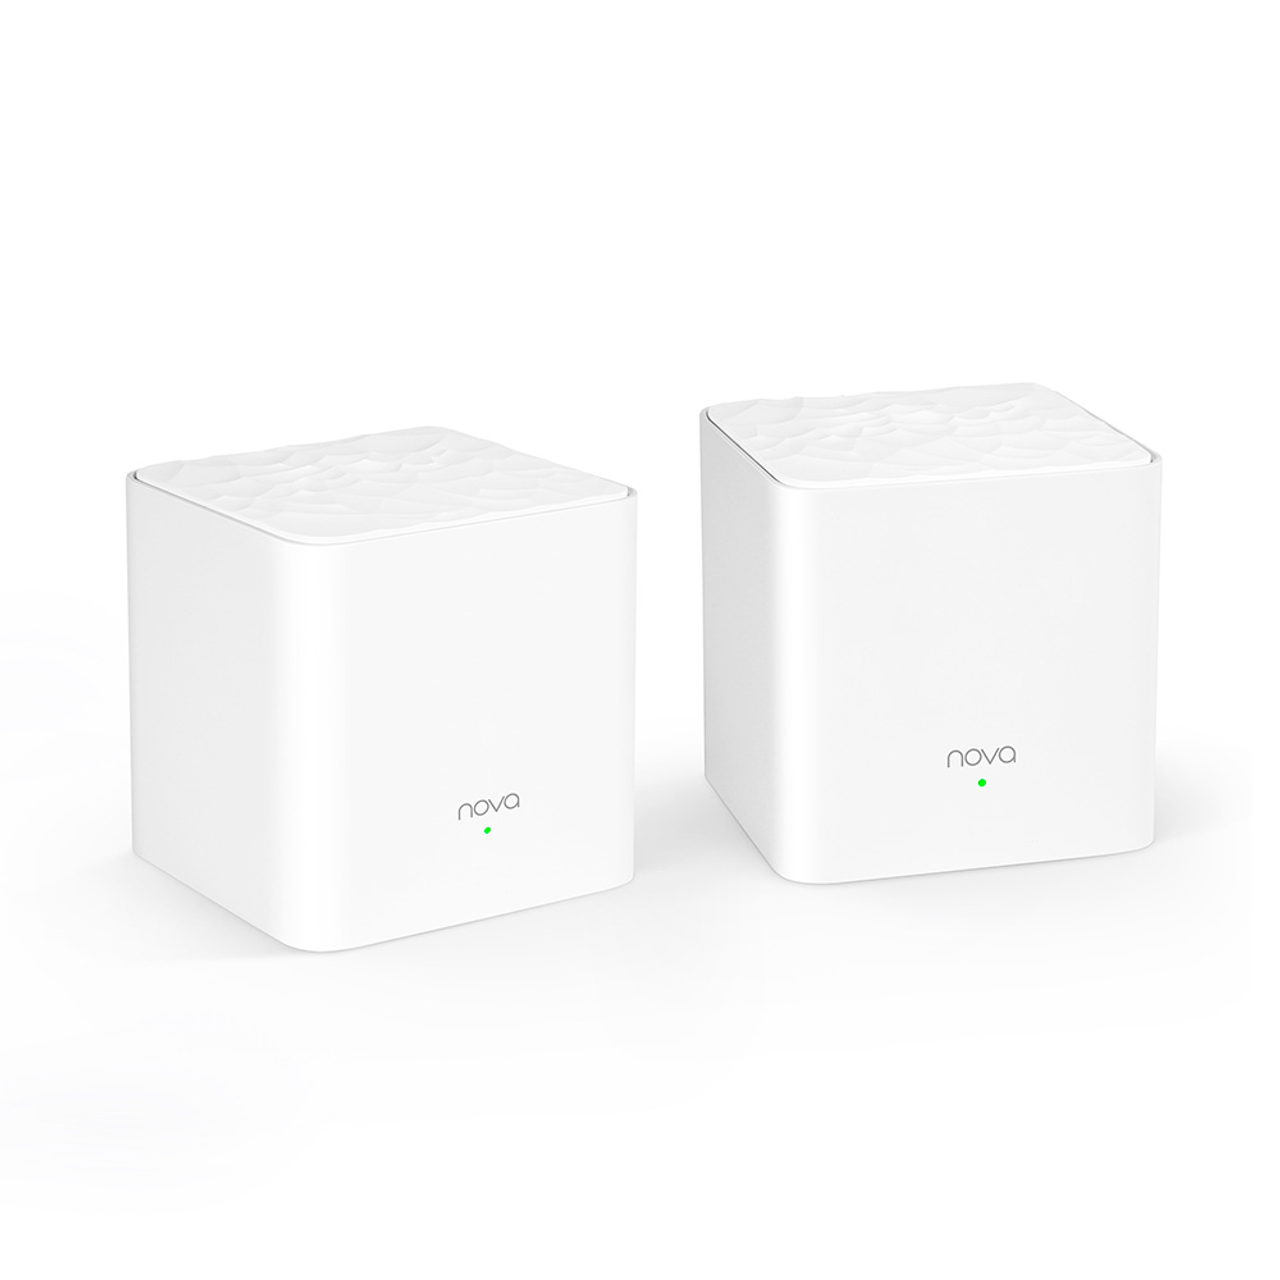 Tenda Nova MW3 Mesh3f Whole Home Mesh Wifi System AC1200 Dual-Band 2.4/5Ghz  Wireless Router for Wi-Fi Wide Range Coverage